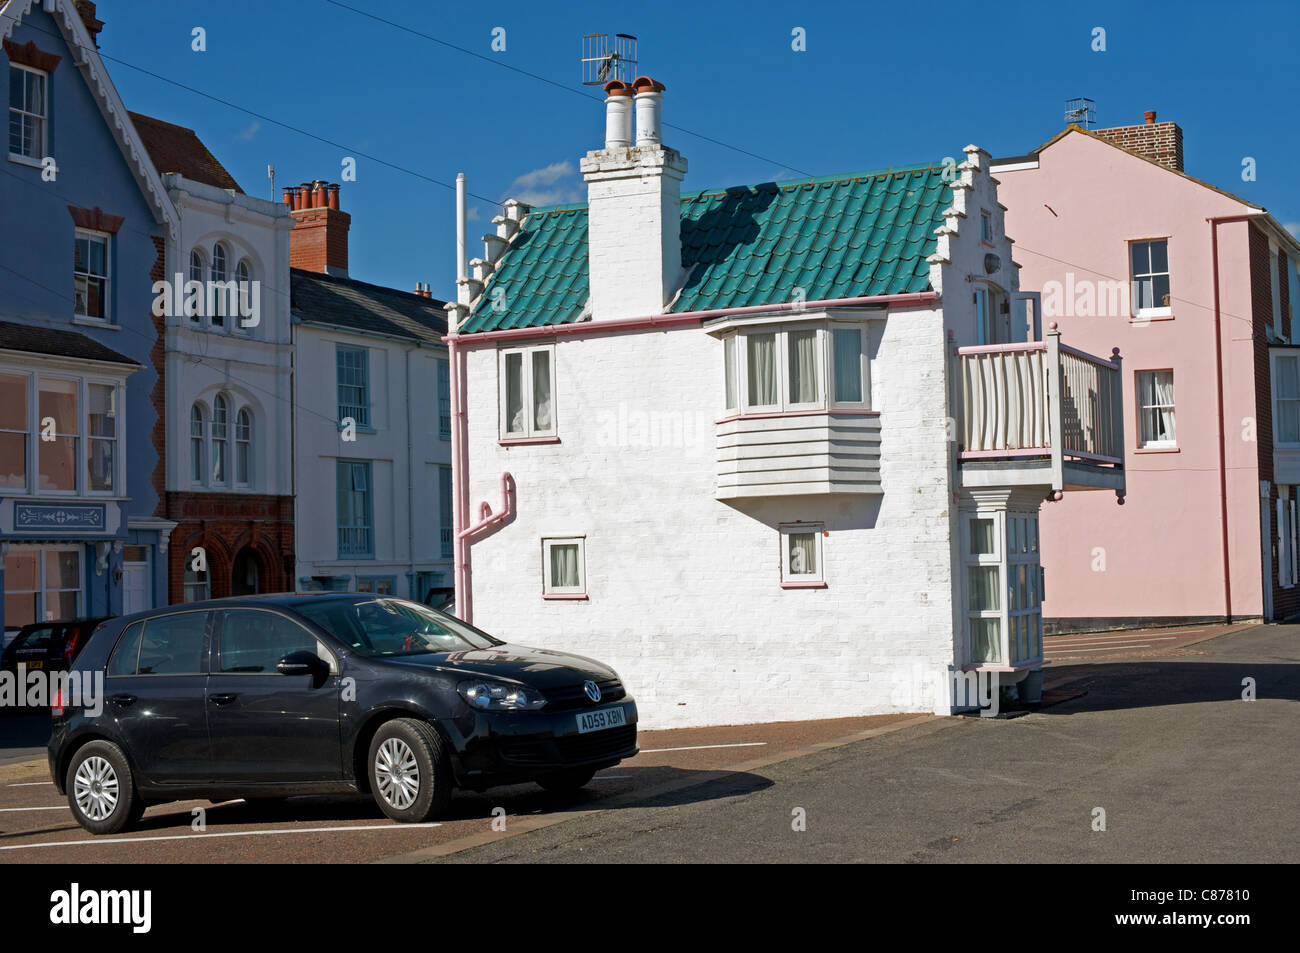 Small residential propery. Aldeburgh, Suffolk, UK. Stock Photo